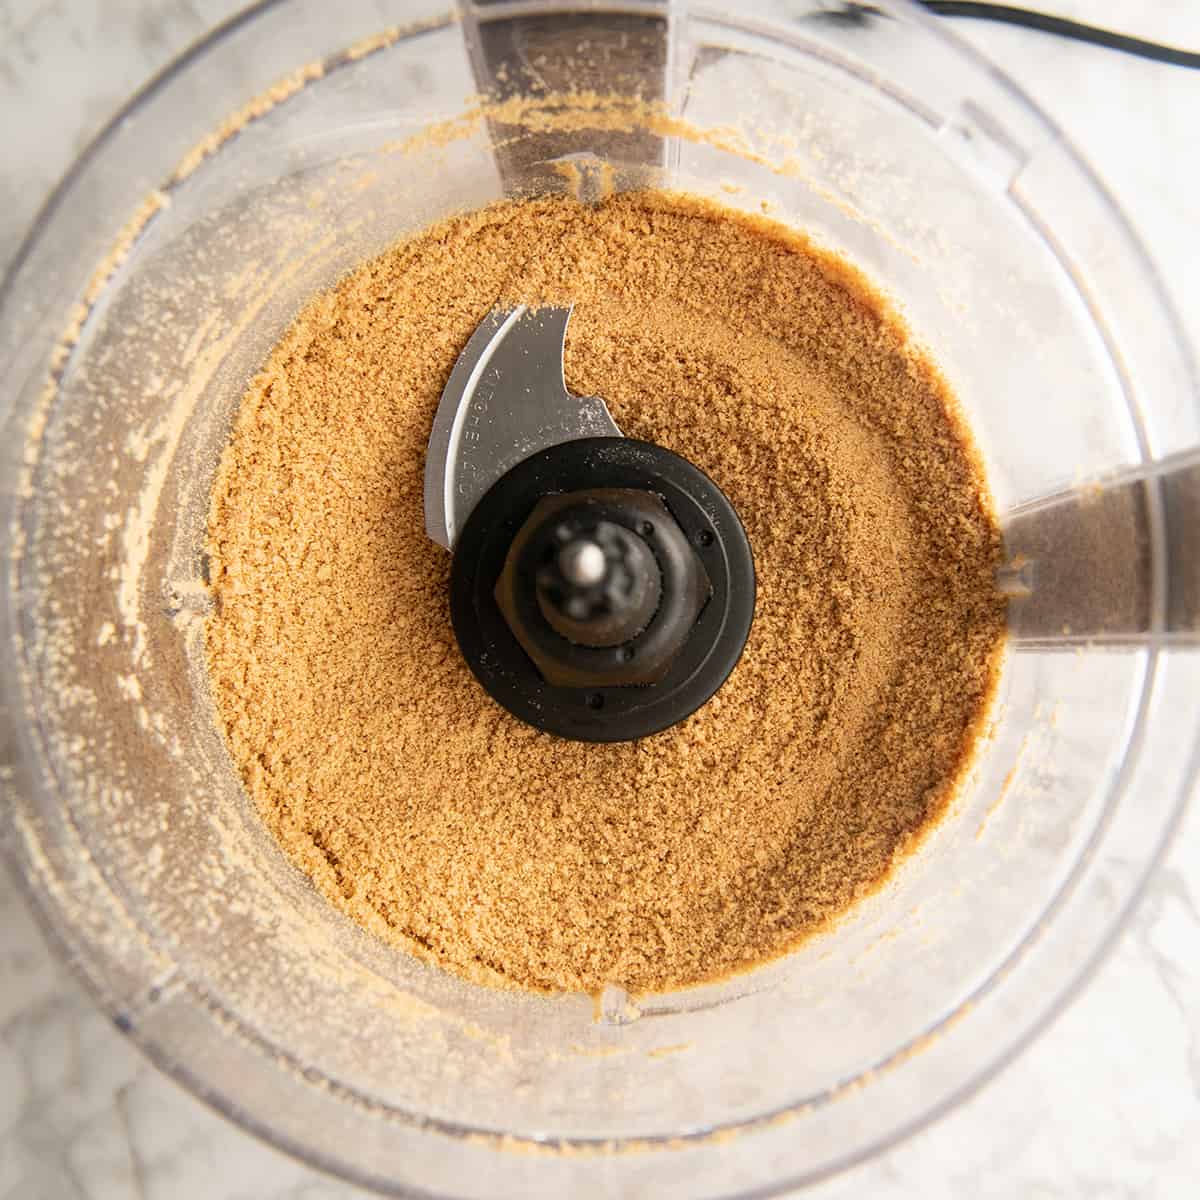 making graham cracker crumbs in a food processor to use to make chocolate peanut butter balls